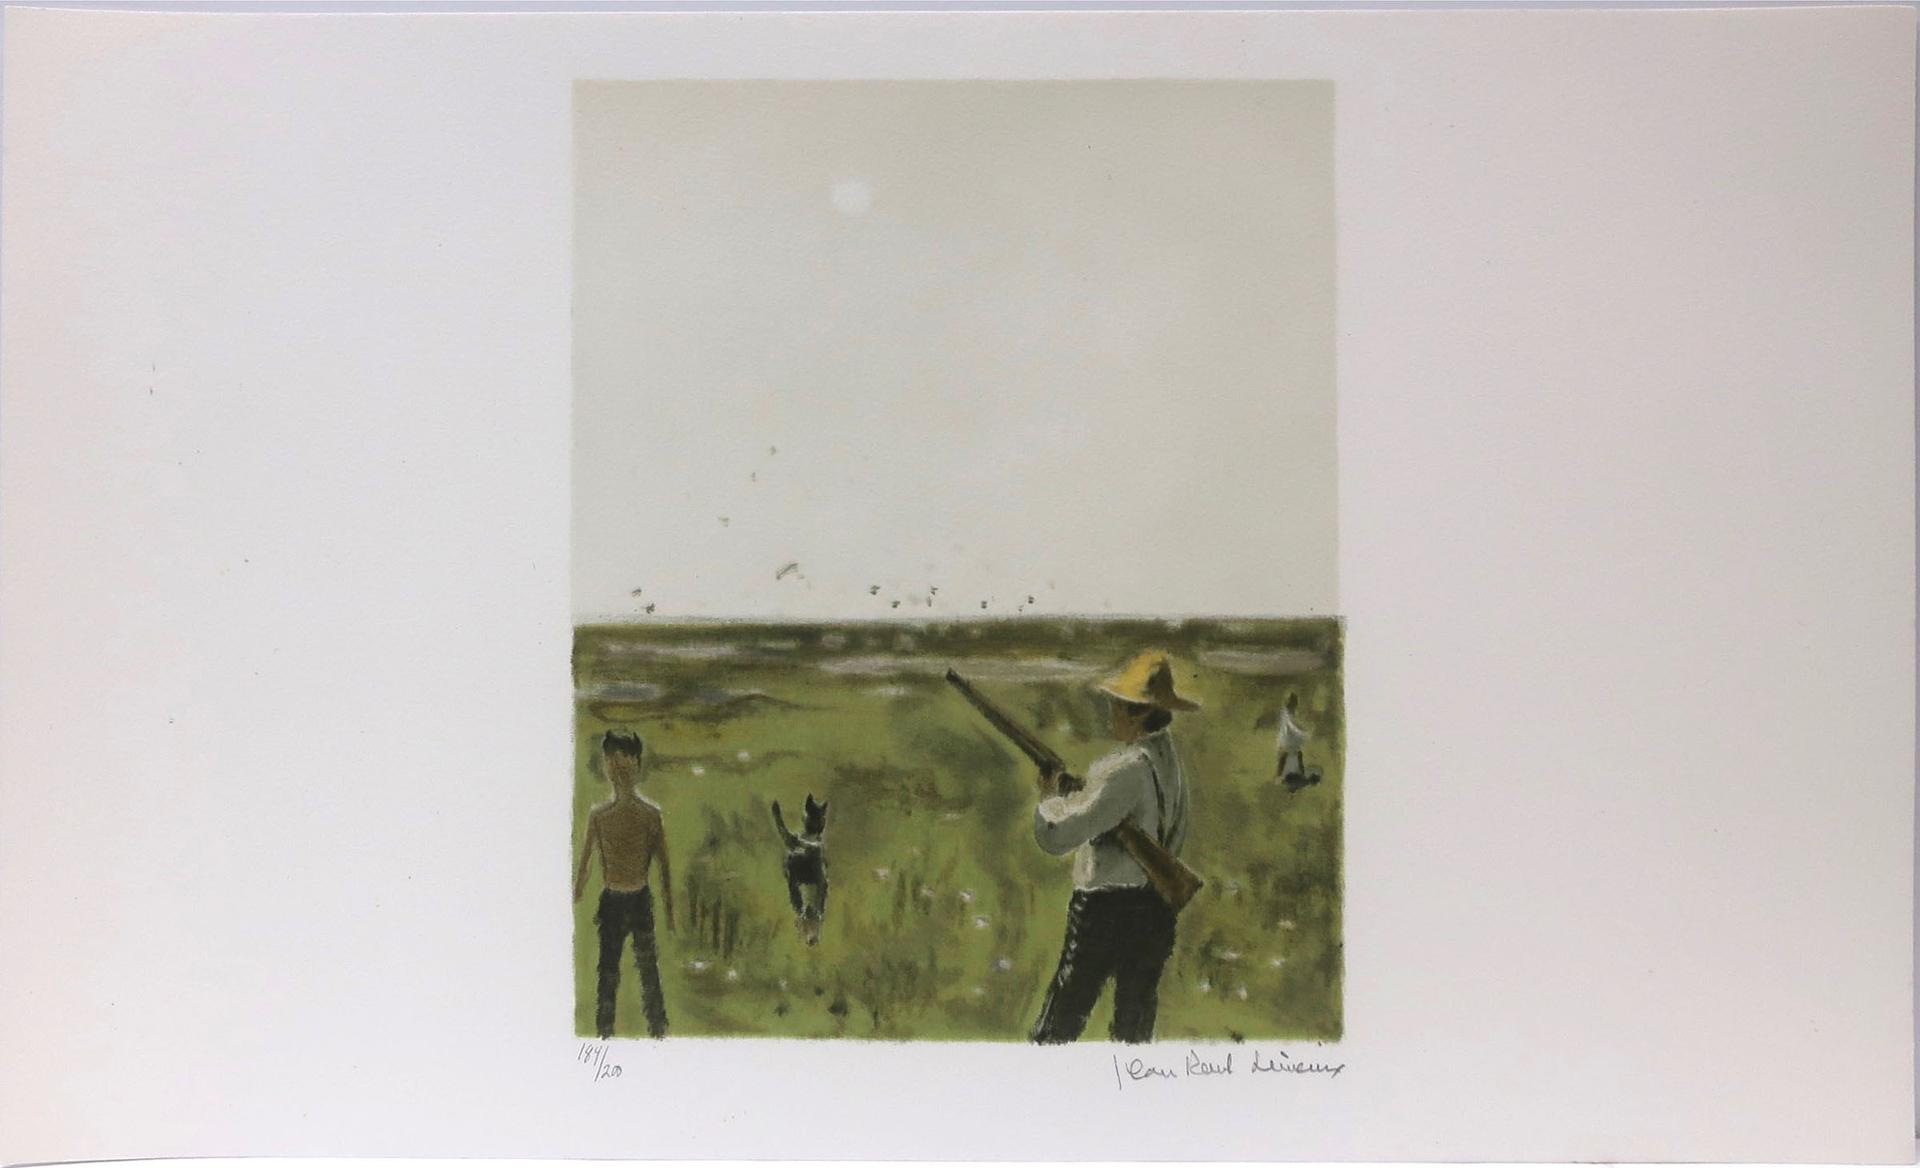 Jean Paul Lemieux (1904-1990) - Untitled (Duck Hunting) From The Series 